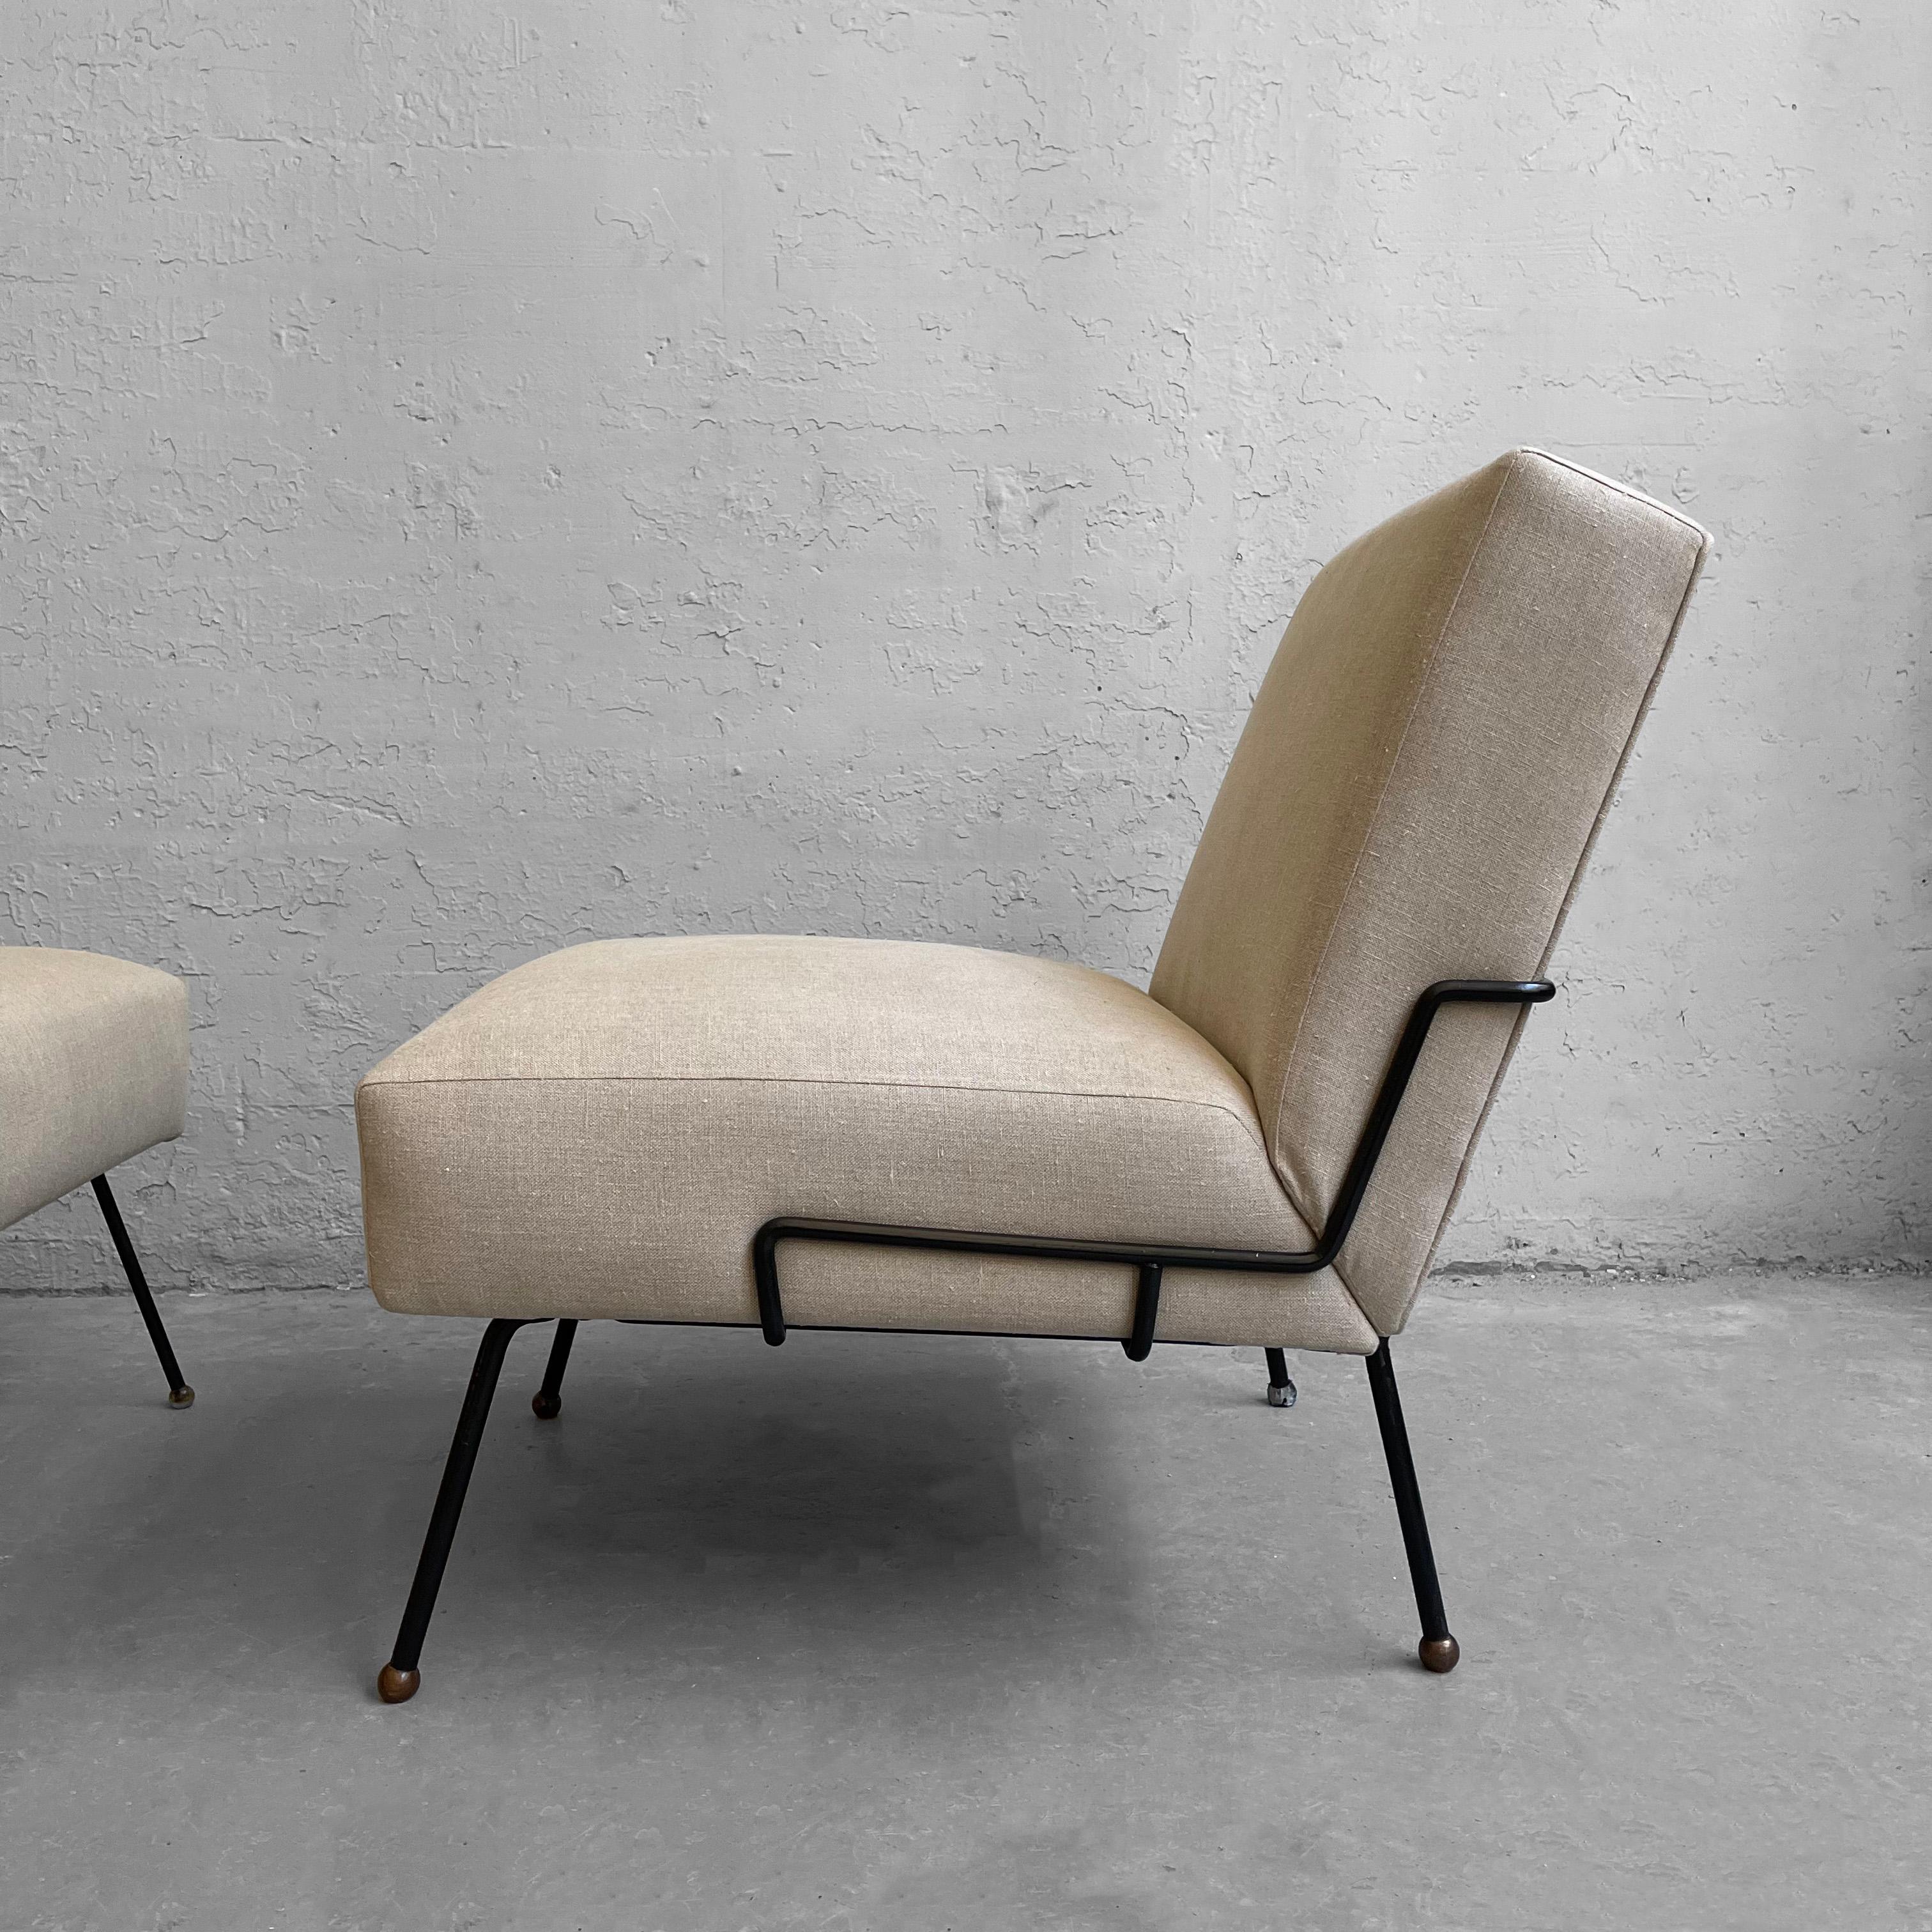 Wrought Iron Lounge Chairs by Dan Johnson for Pacific Iron 1